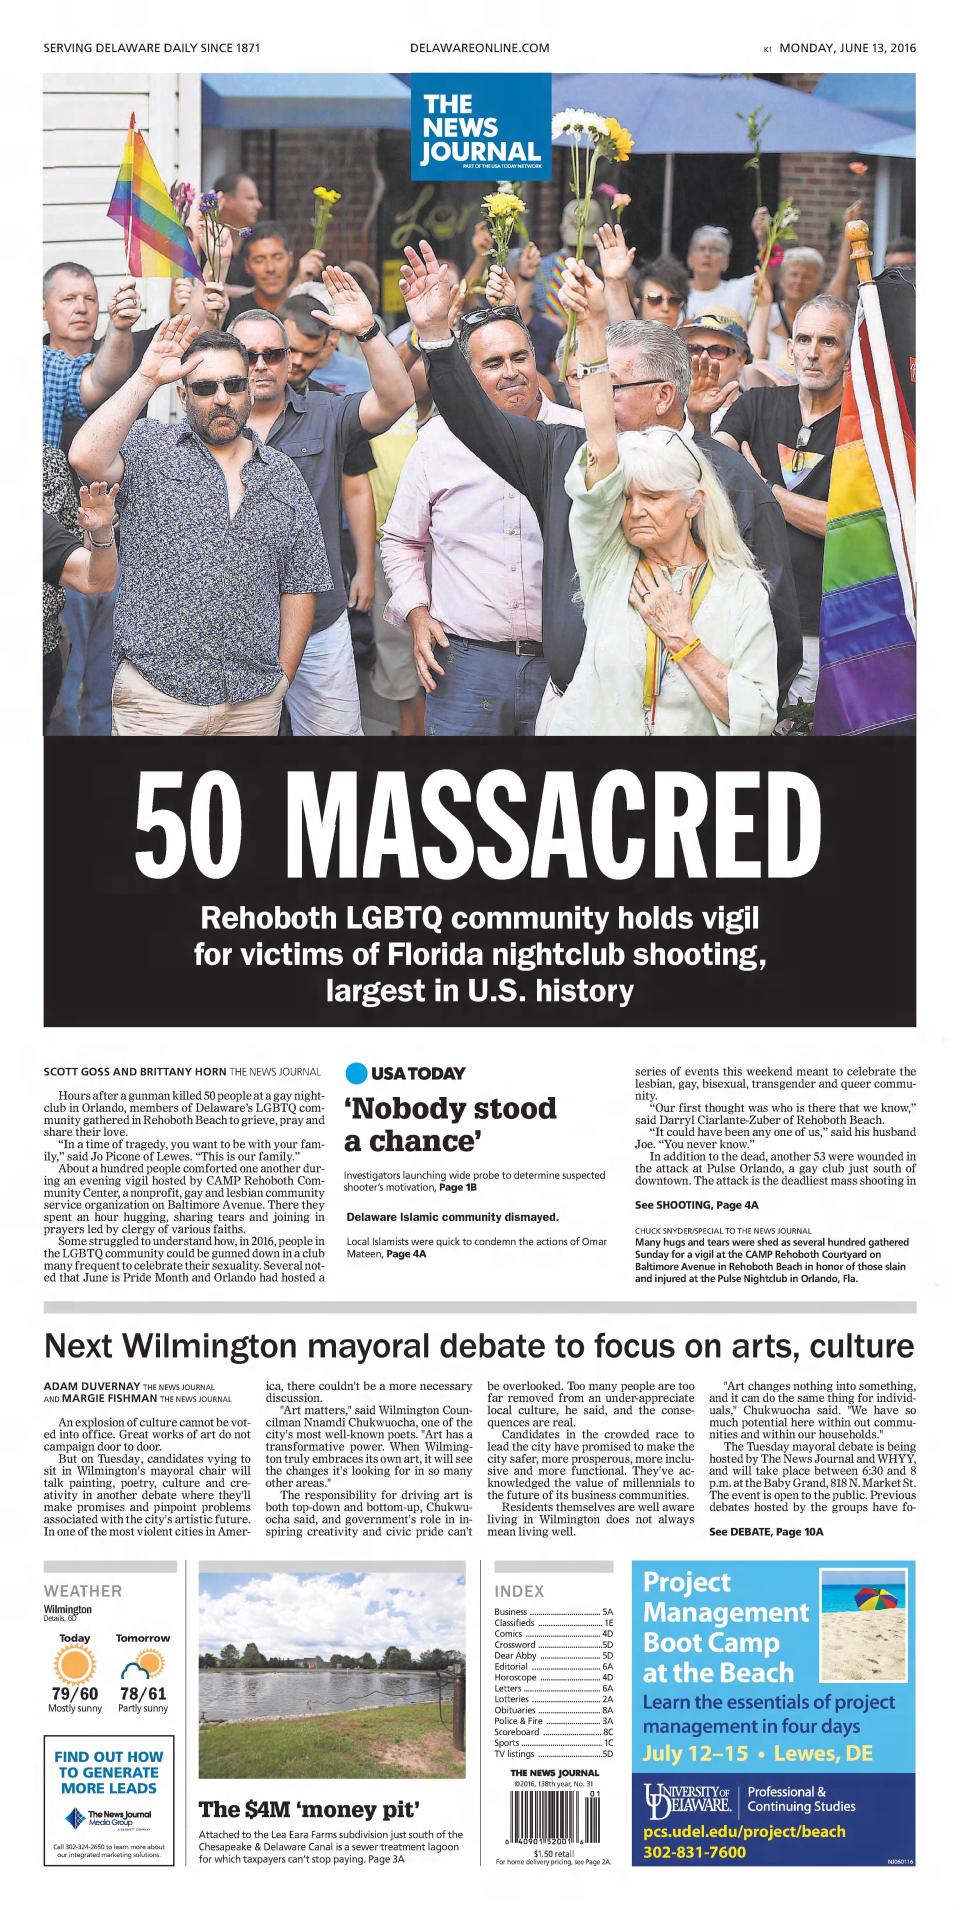 Front page of The News Journal from June 13, 2016.